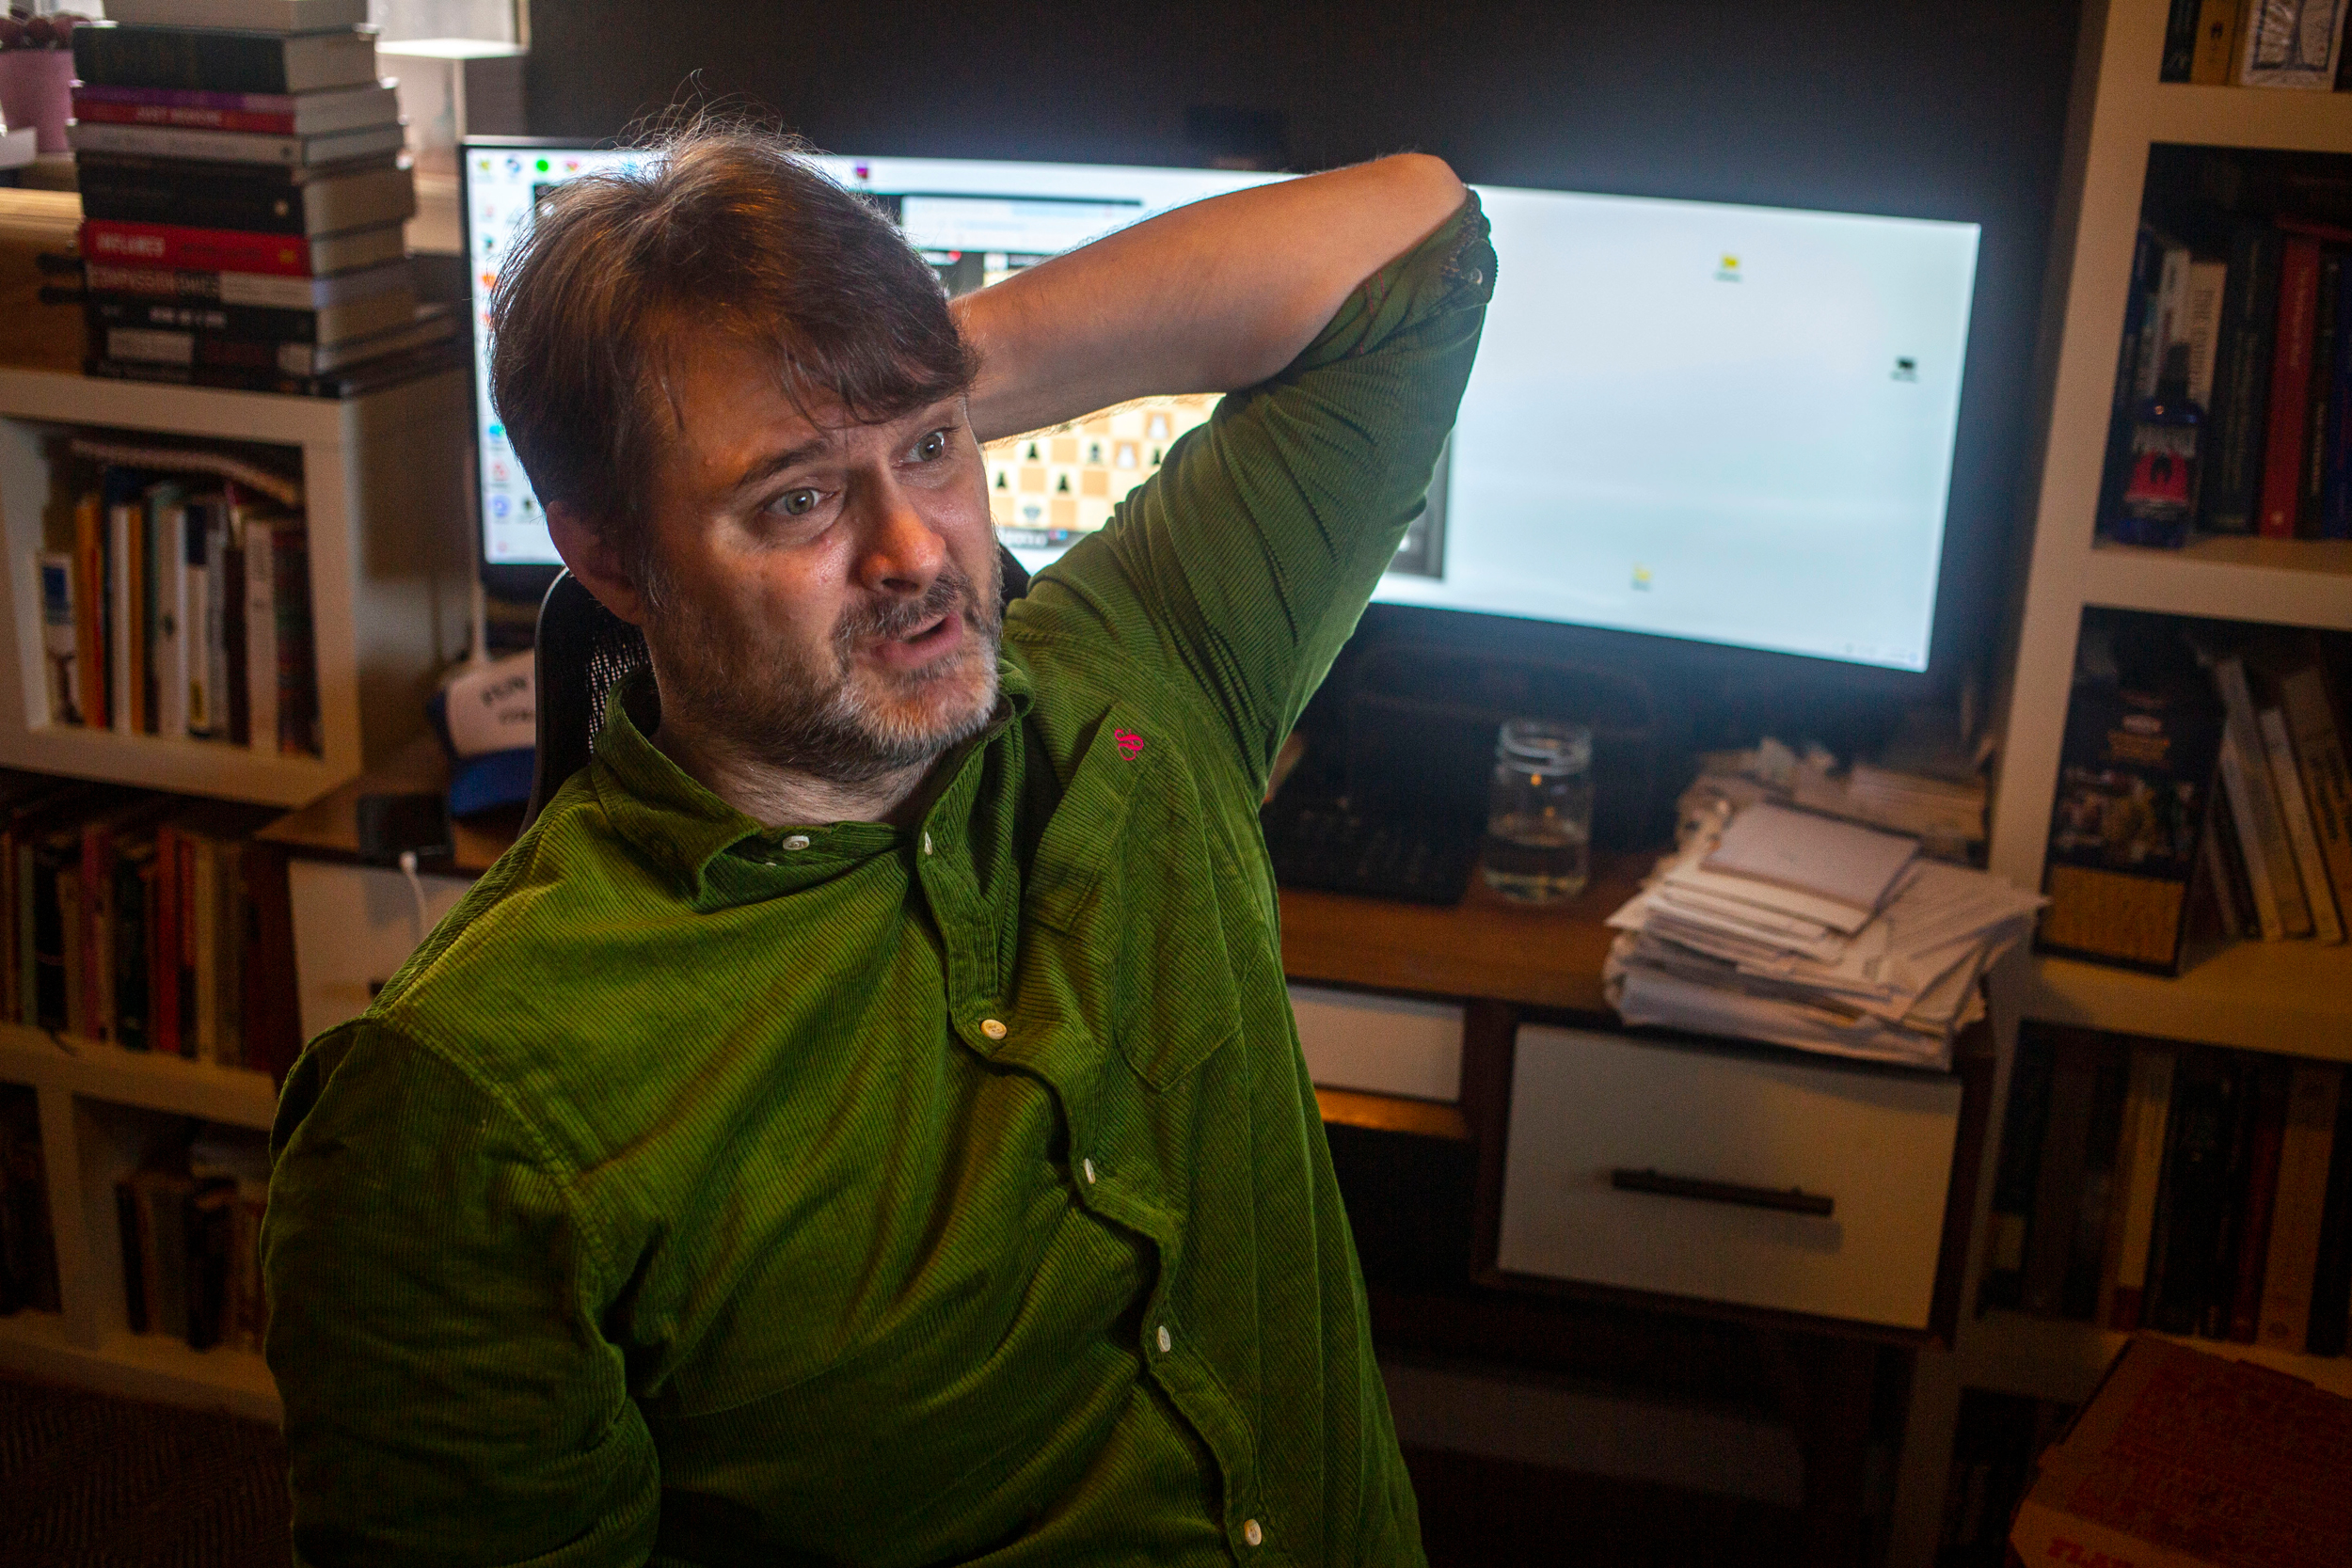 Gabriel Clark-Leach, wearing a green button down, sits in a relaxed pose in front of his computer in his office, one hand behind his head.